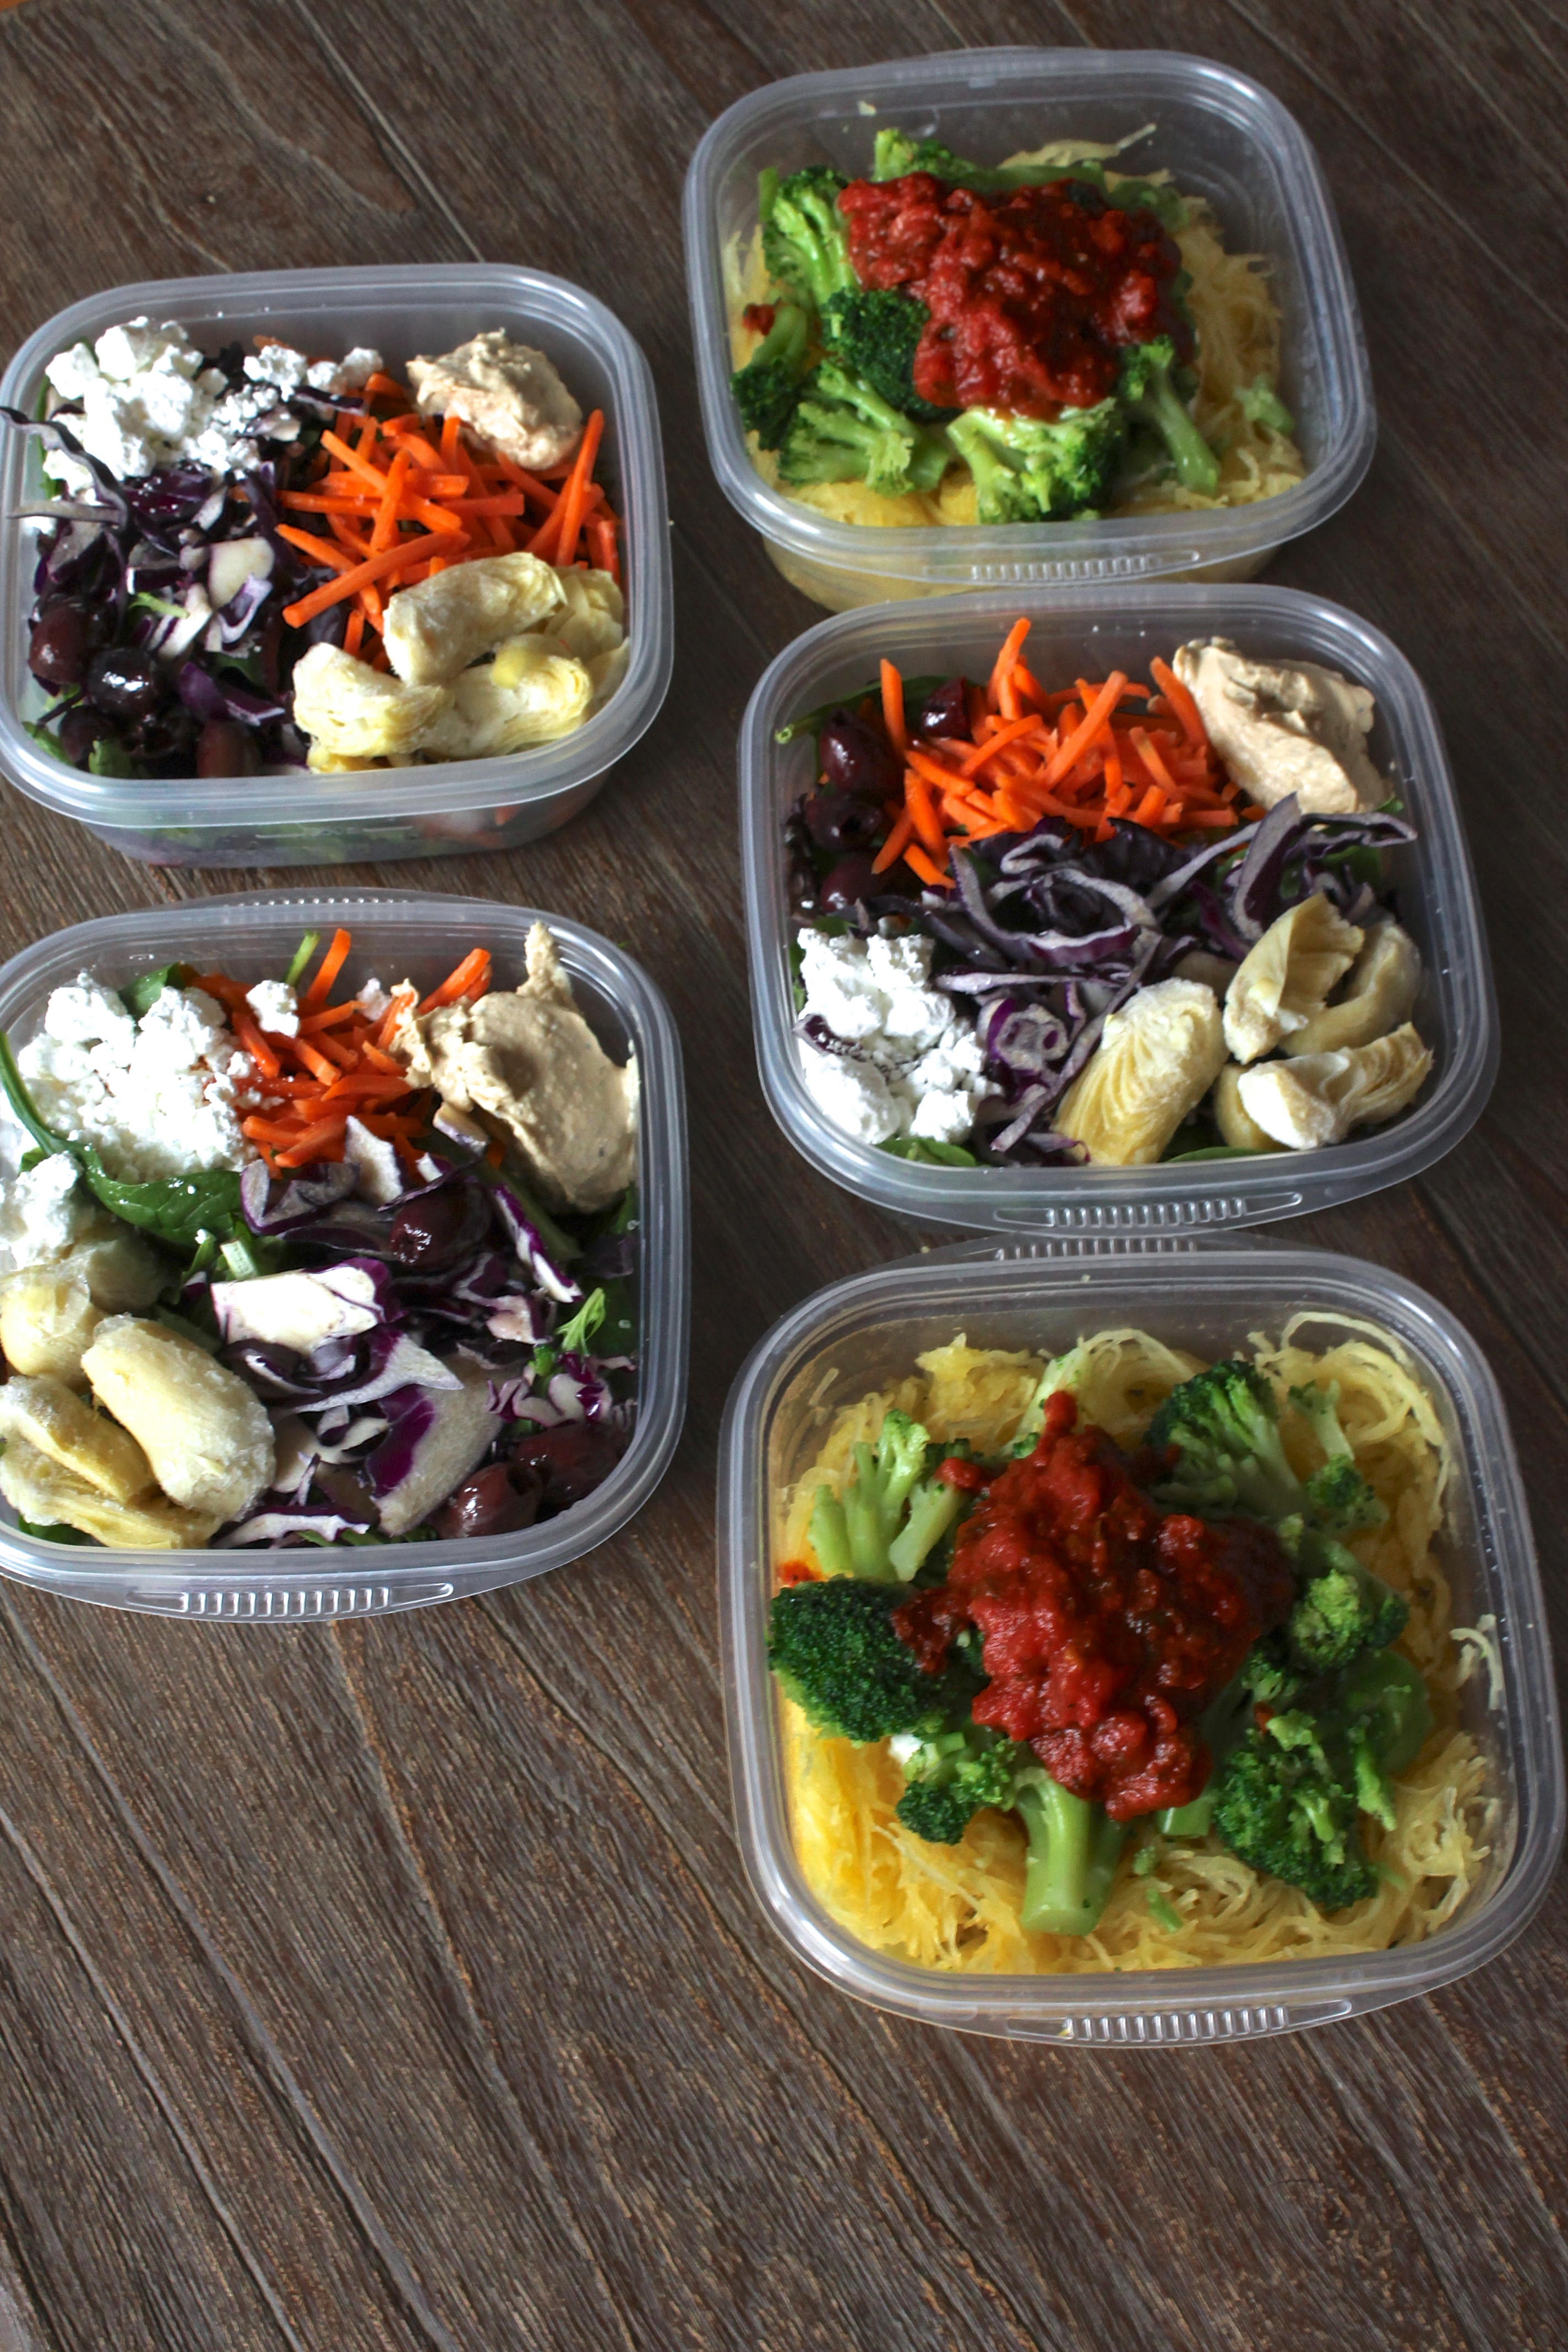 Make Ahead Healthy Lunches
 Make Ahead Lunches